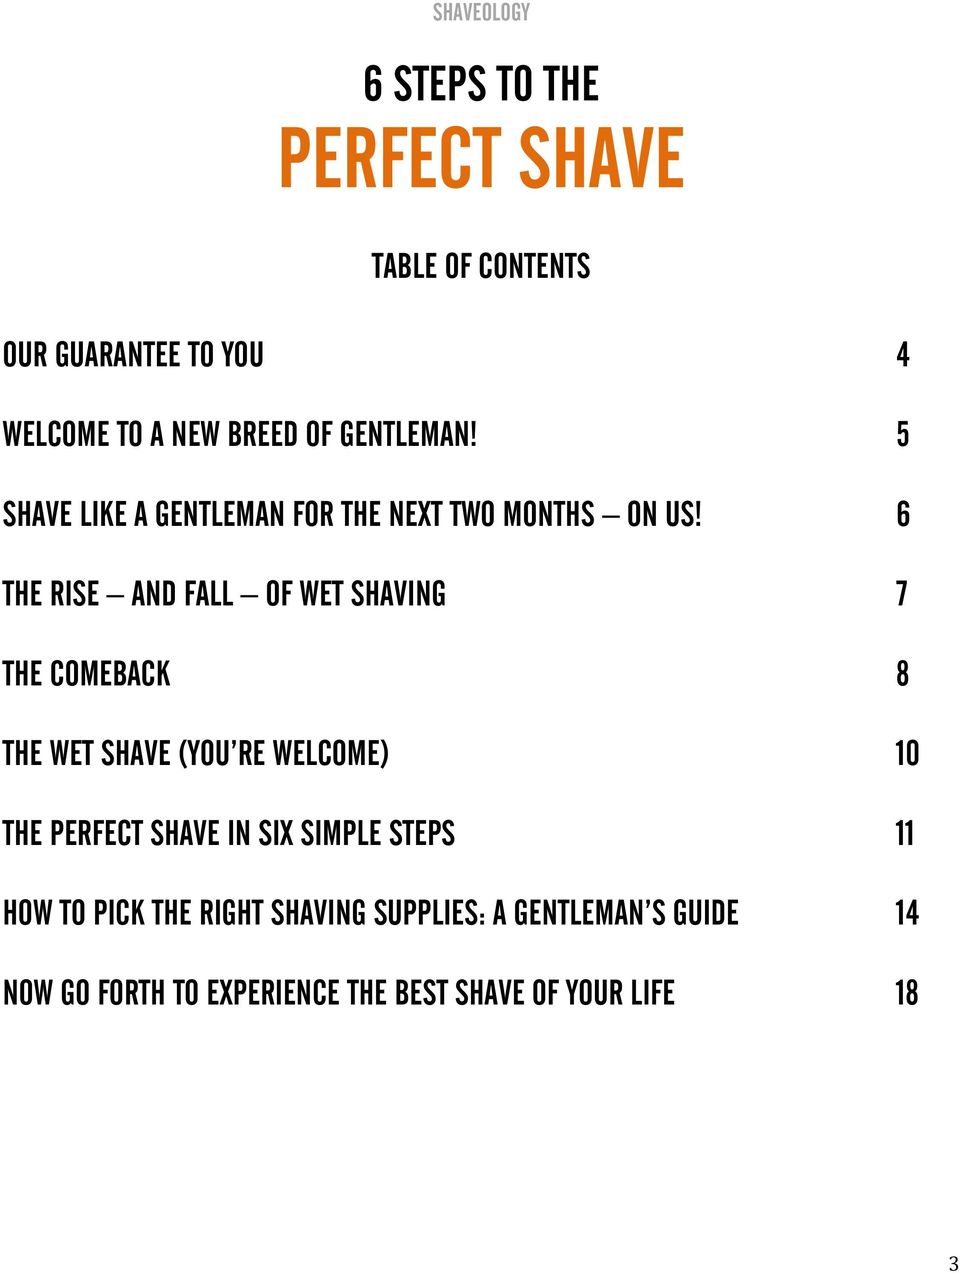 6 THE RISE AND FALL OF WET SHAVING 7 THE COMEBACK 8 THE WET SHAVE (YOU RE WELCOME) 10 THE PERFECT